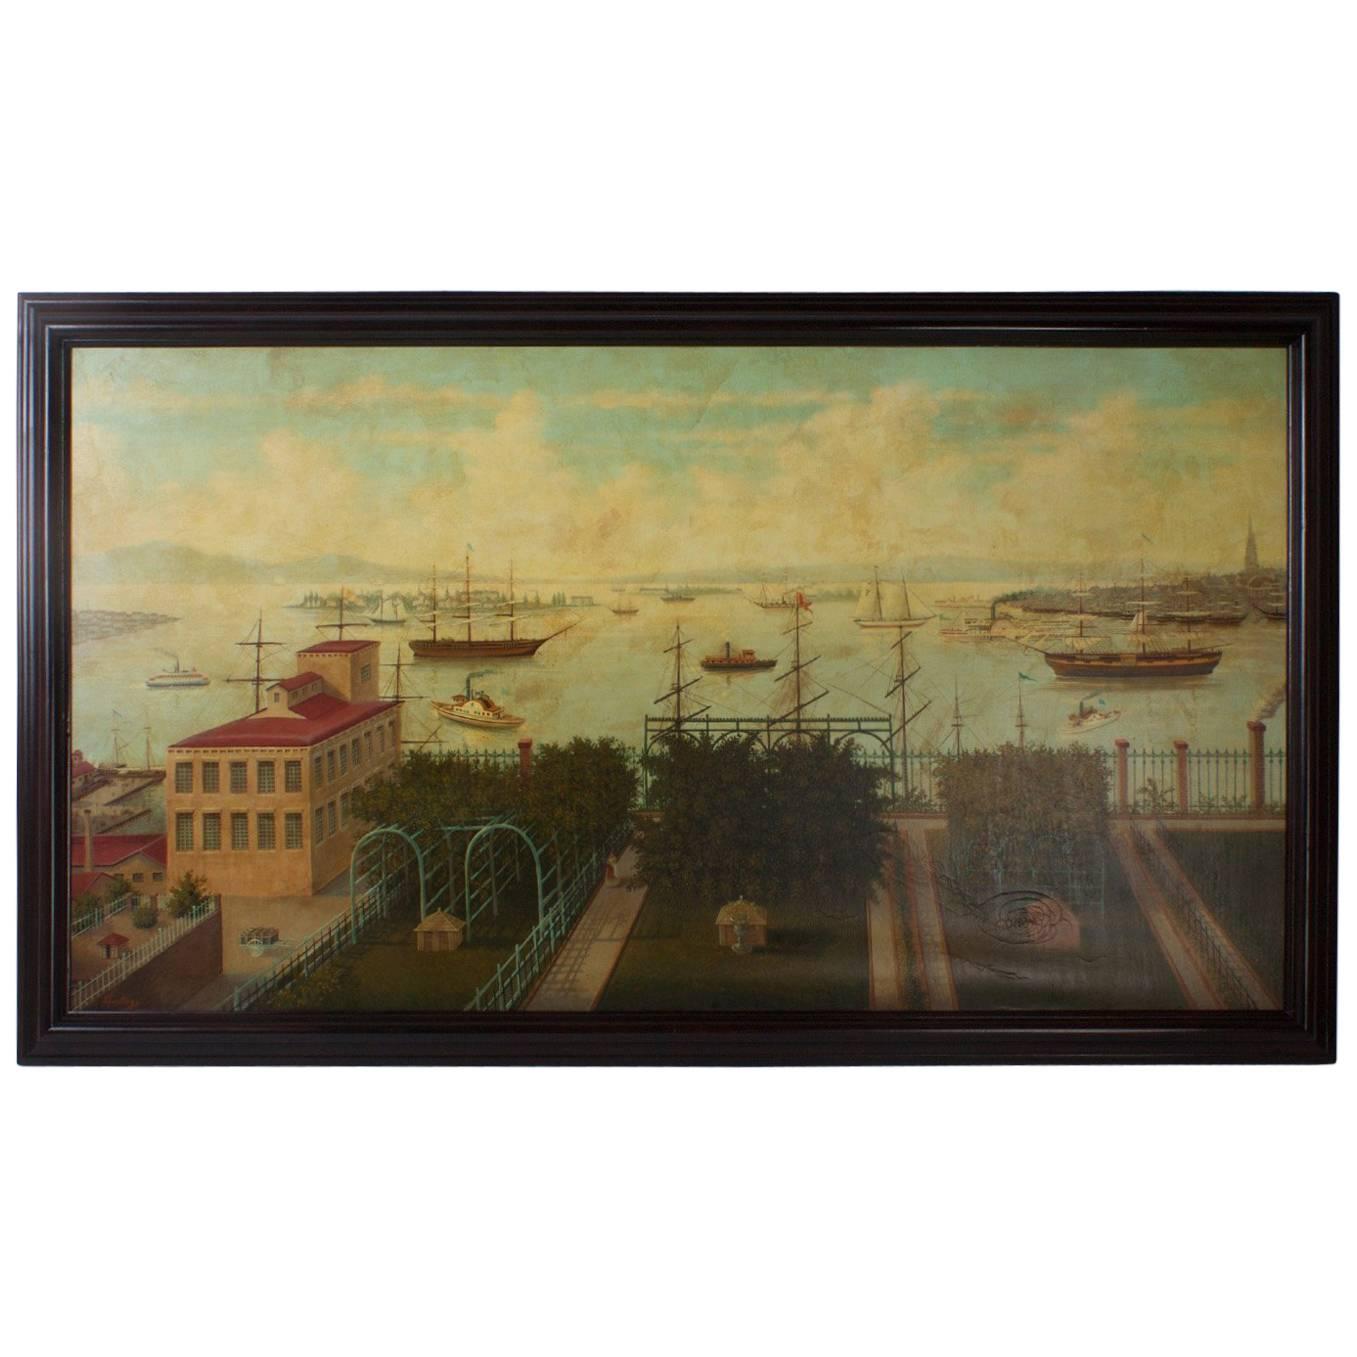 Large Oil Painting on Canvas of a 19th Century Harbor